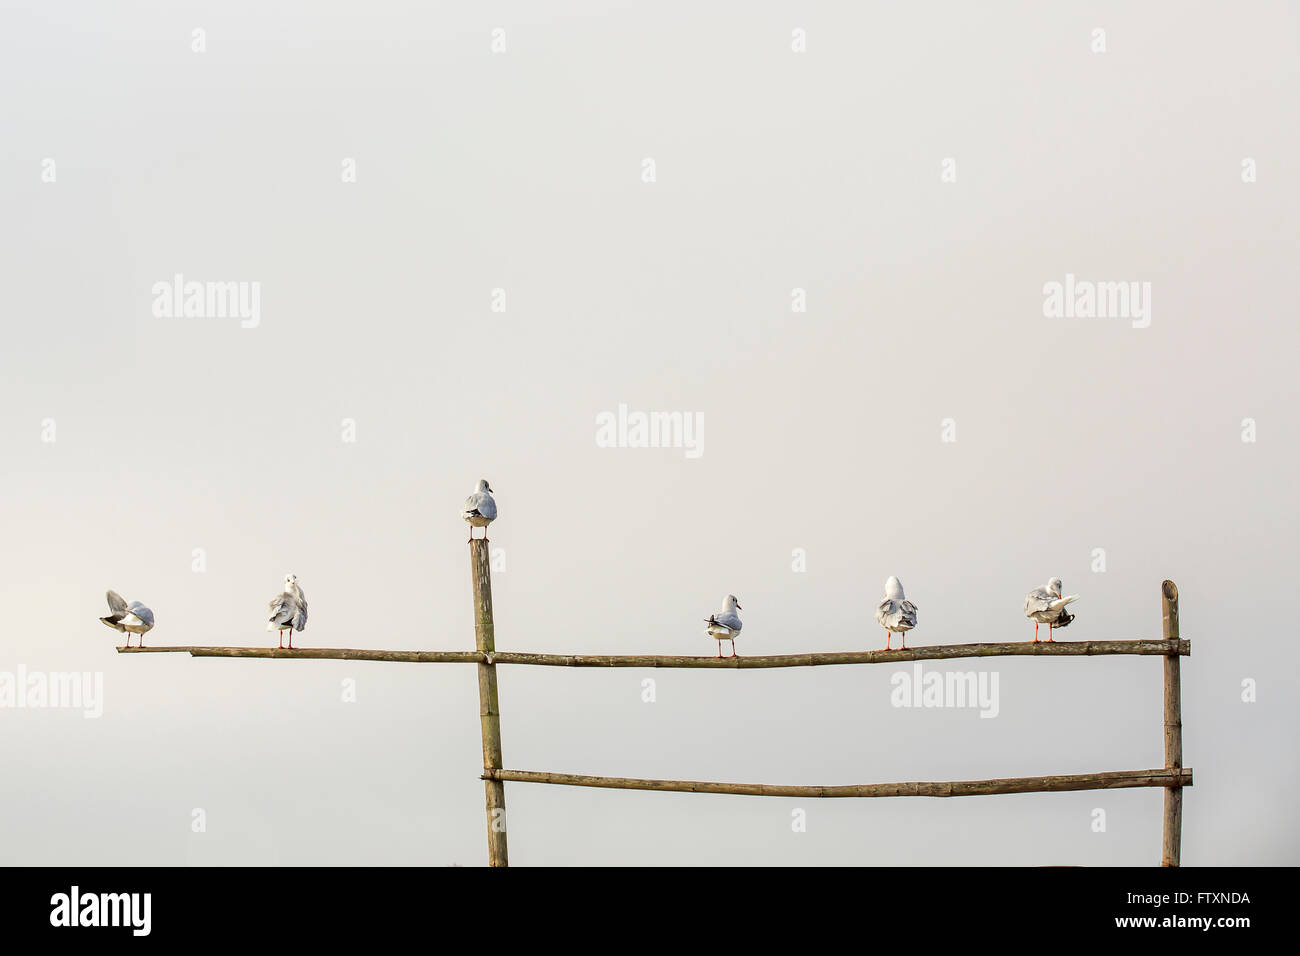 Seagulls perching on bamboo structure, Thayet, Magway, Myanmar Stock Photo